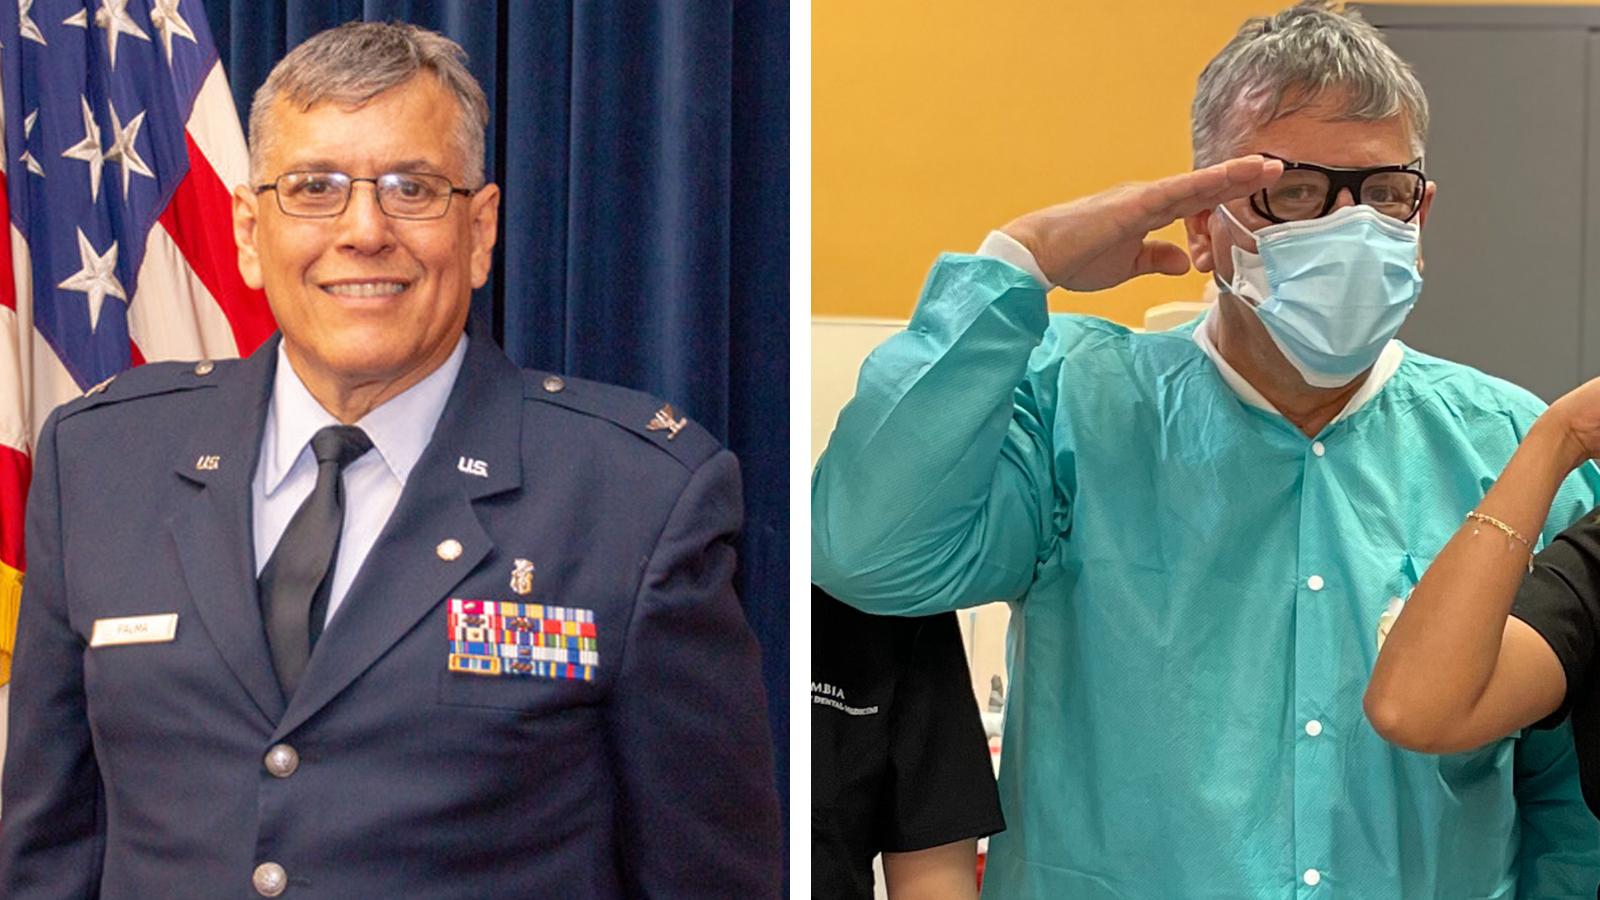 Columbia dentist Jacob Palma in his Air Force uniform (left photo) and in scrubs in his Columbia dental office (right photo)